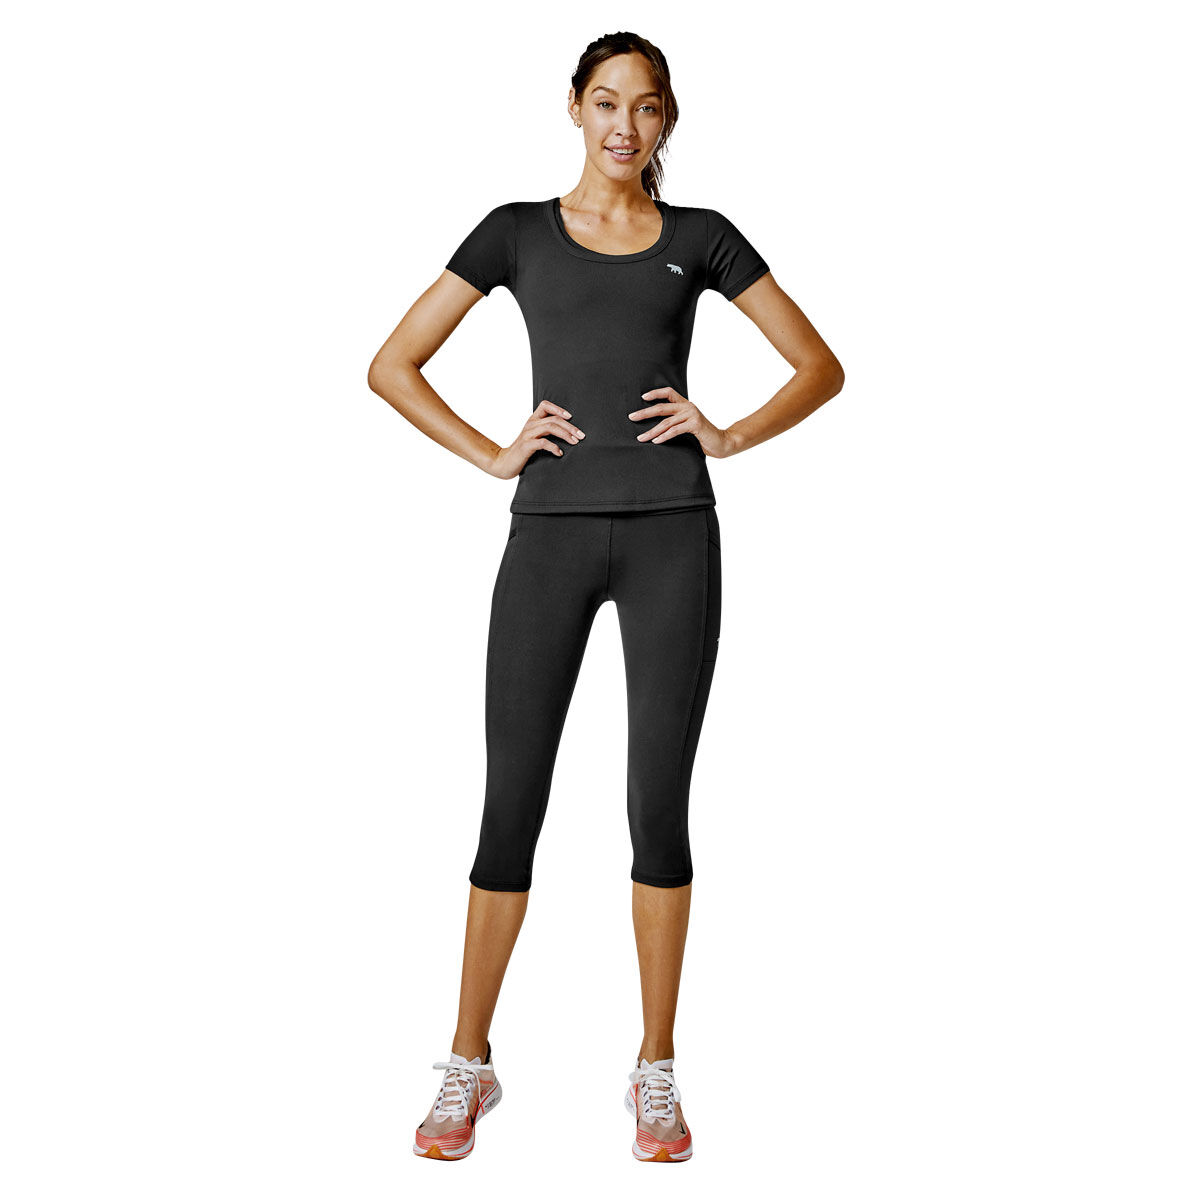 Running Bare Leggings Womens 4/6 Sports Compression USA Workout Black